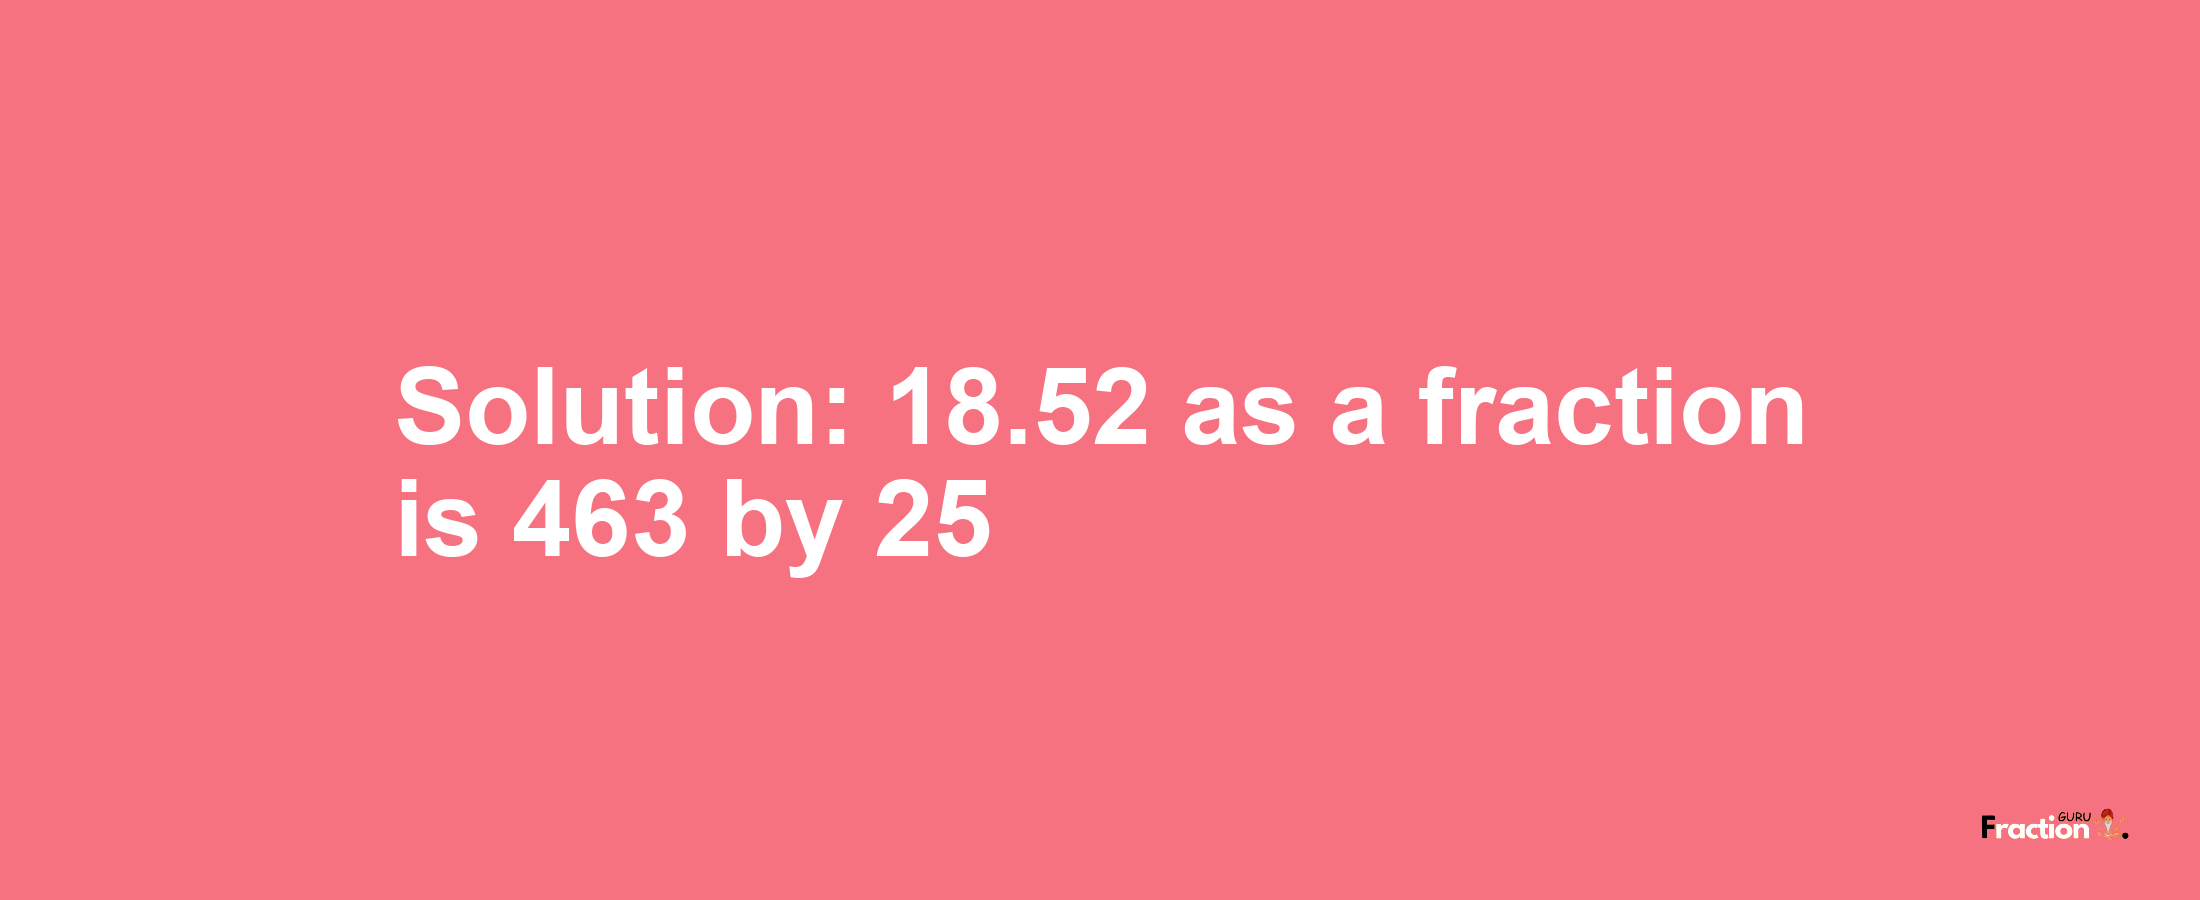 Solution:18.52 as a fraction is 463/25